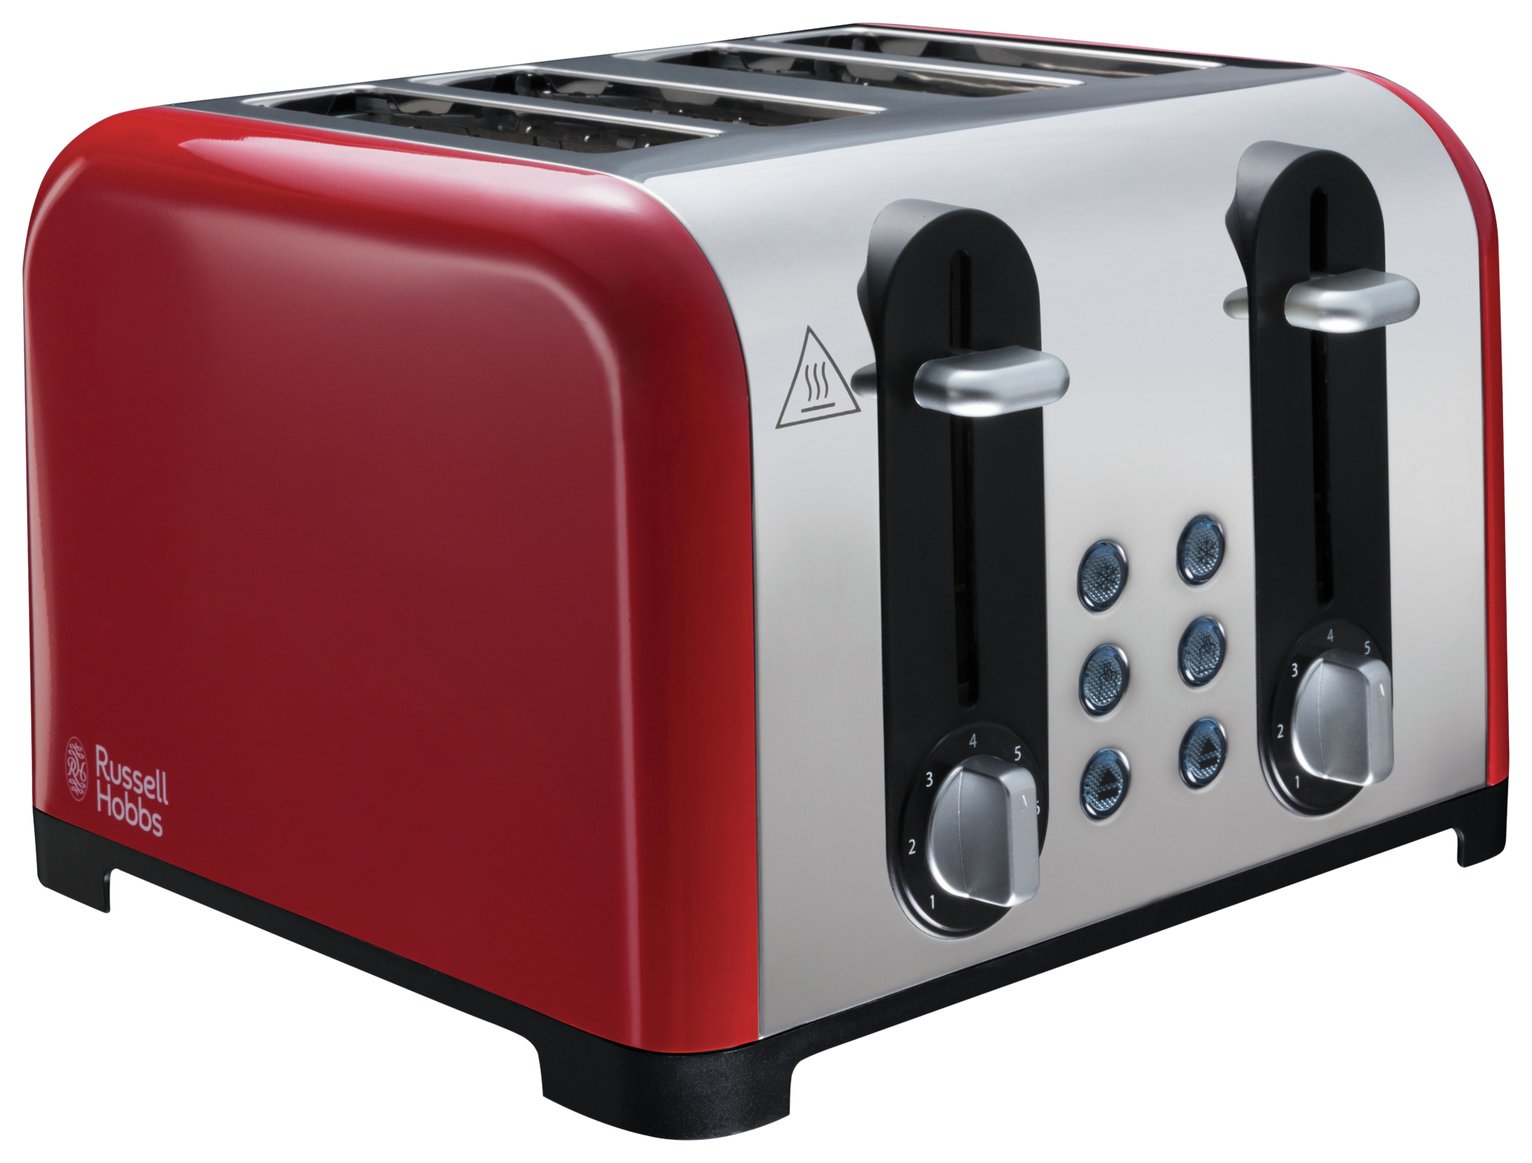 Russell Hobbs 22406 Worcester 4 Slice Toaster Review